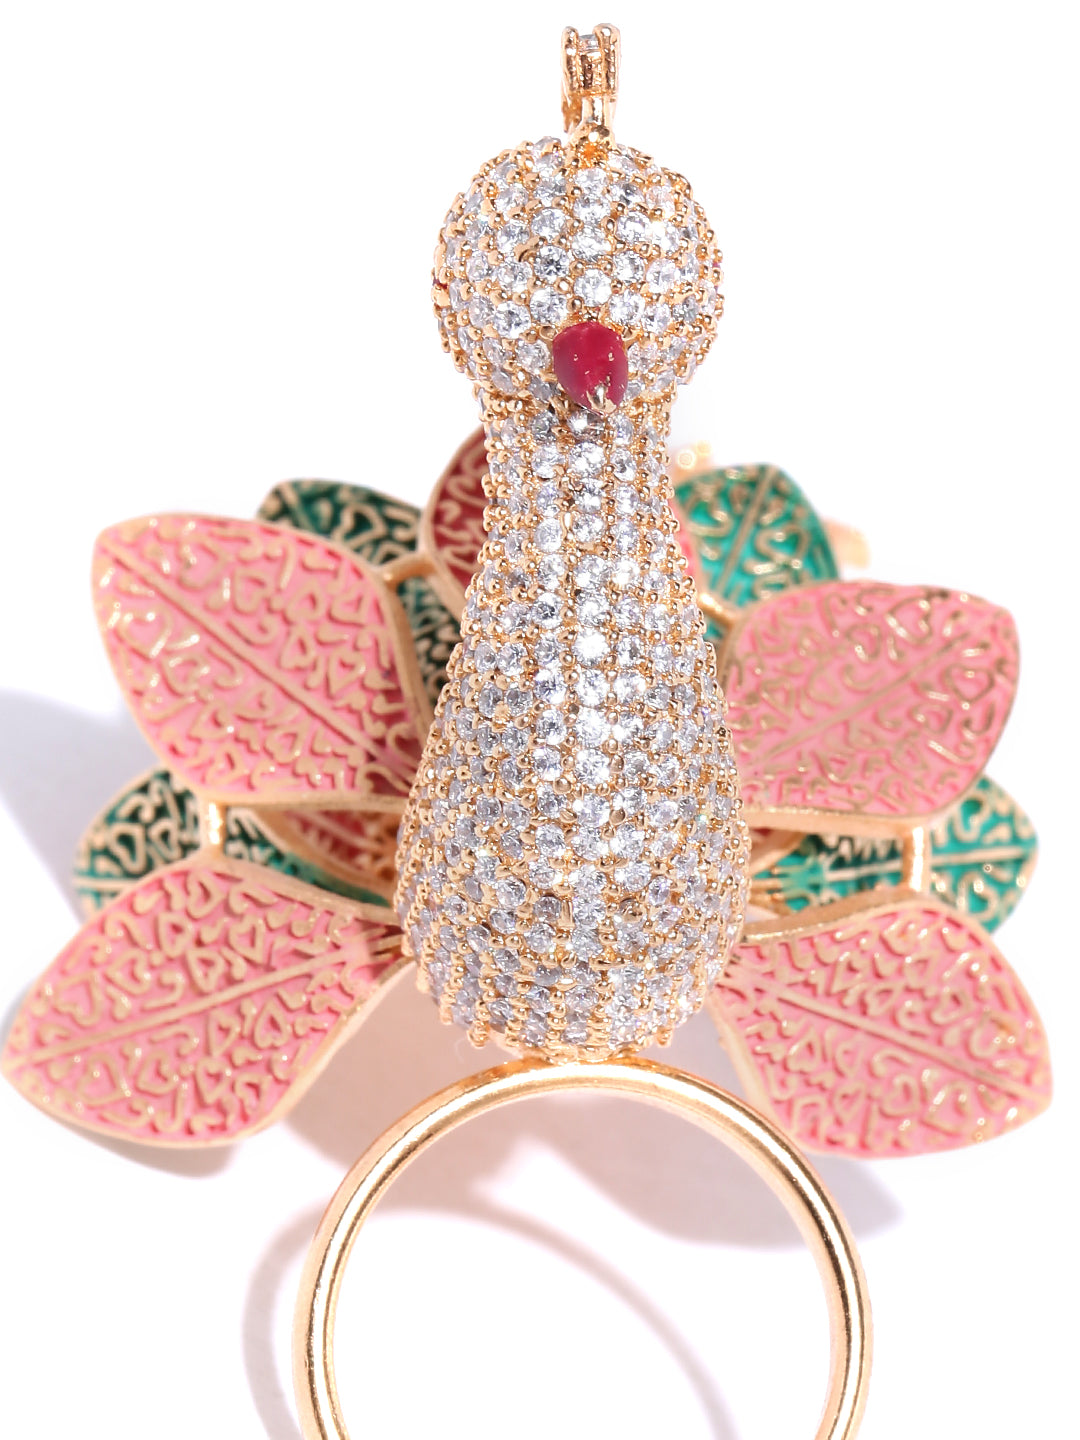 Gold-Plated American Diamond Studded Peacock Inspired Meenakari Adjustable Ring in Peach and Green Color